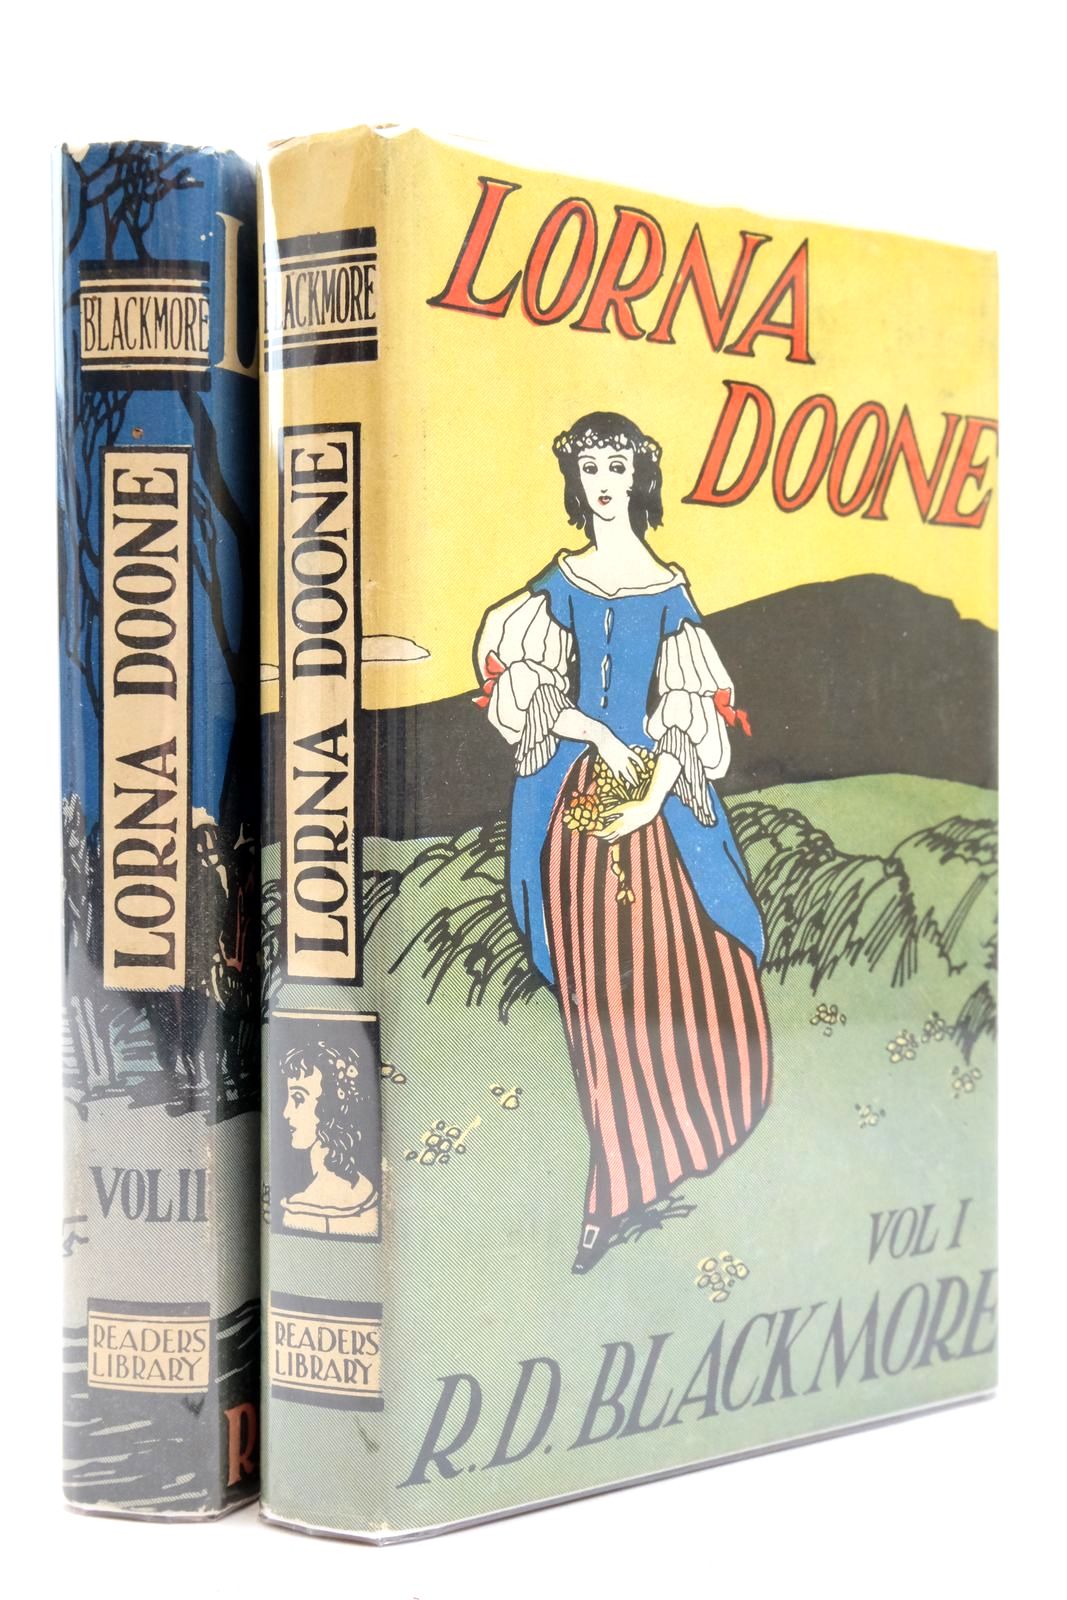 Photo of LORNA DOONE (2 VOLUMES) written by Blackmore, R.D. published by The Readers Library Publishing Co. Ltd. (STOCK CODE: 2137928)  for sale by Stella & Rose's Books